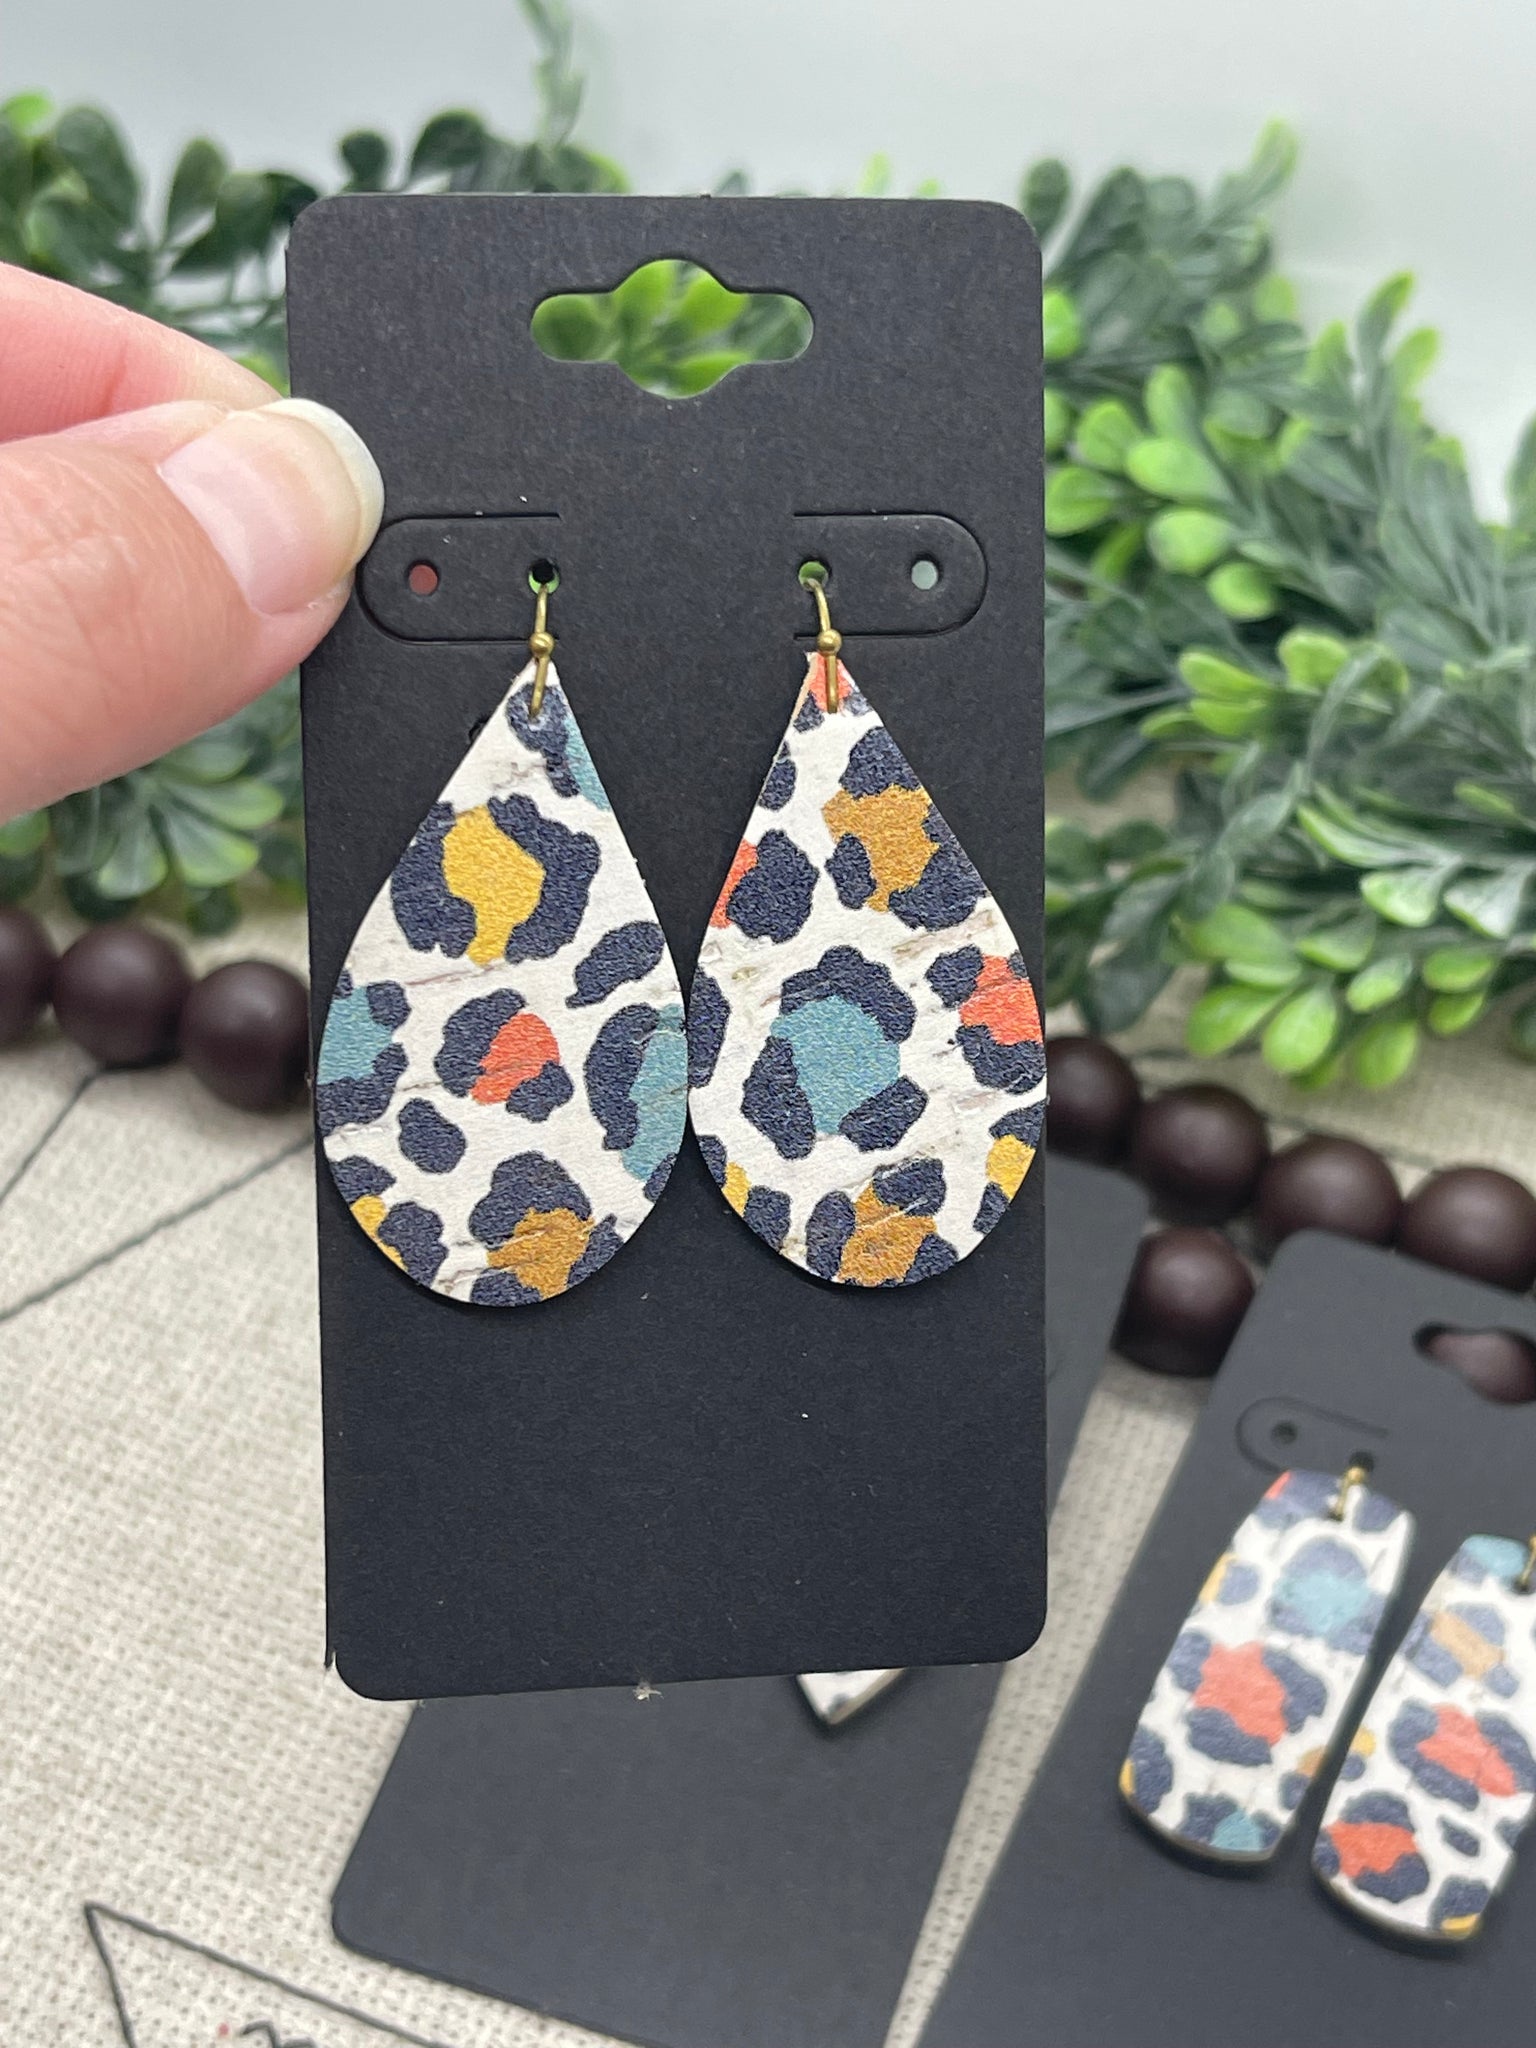 White Cork with Black Teal Mustard Yellow and Dark Orange Leopard Print on Leather Earrings